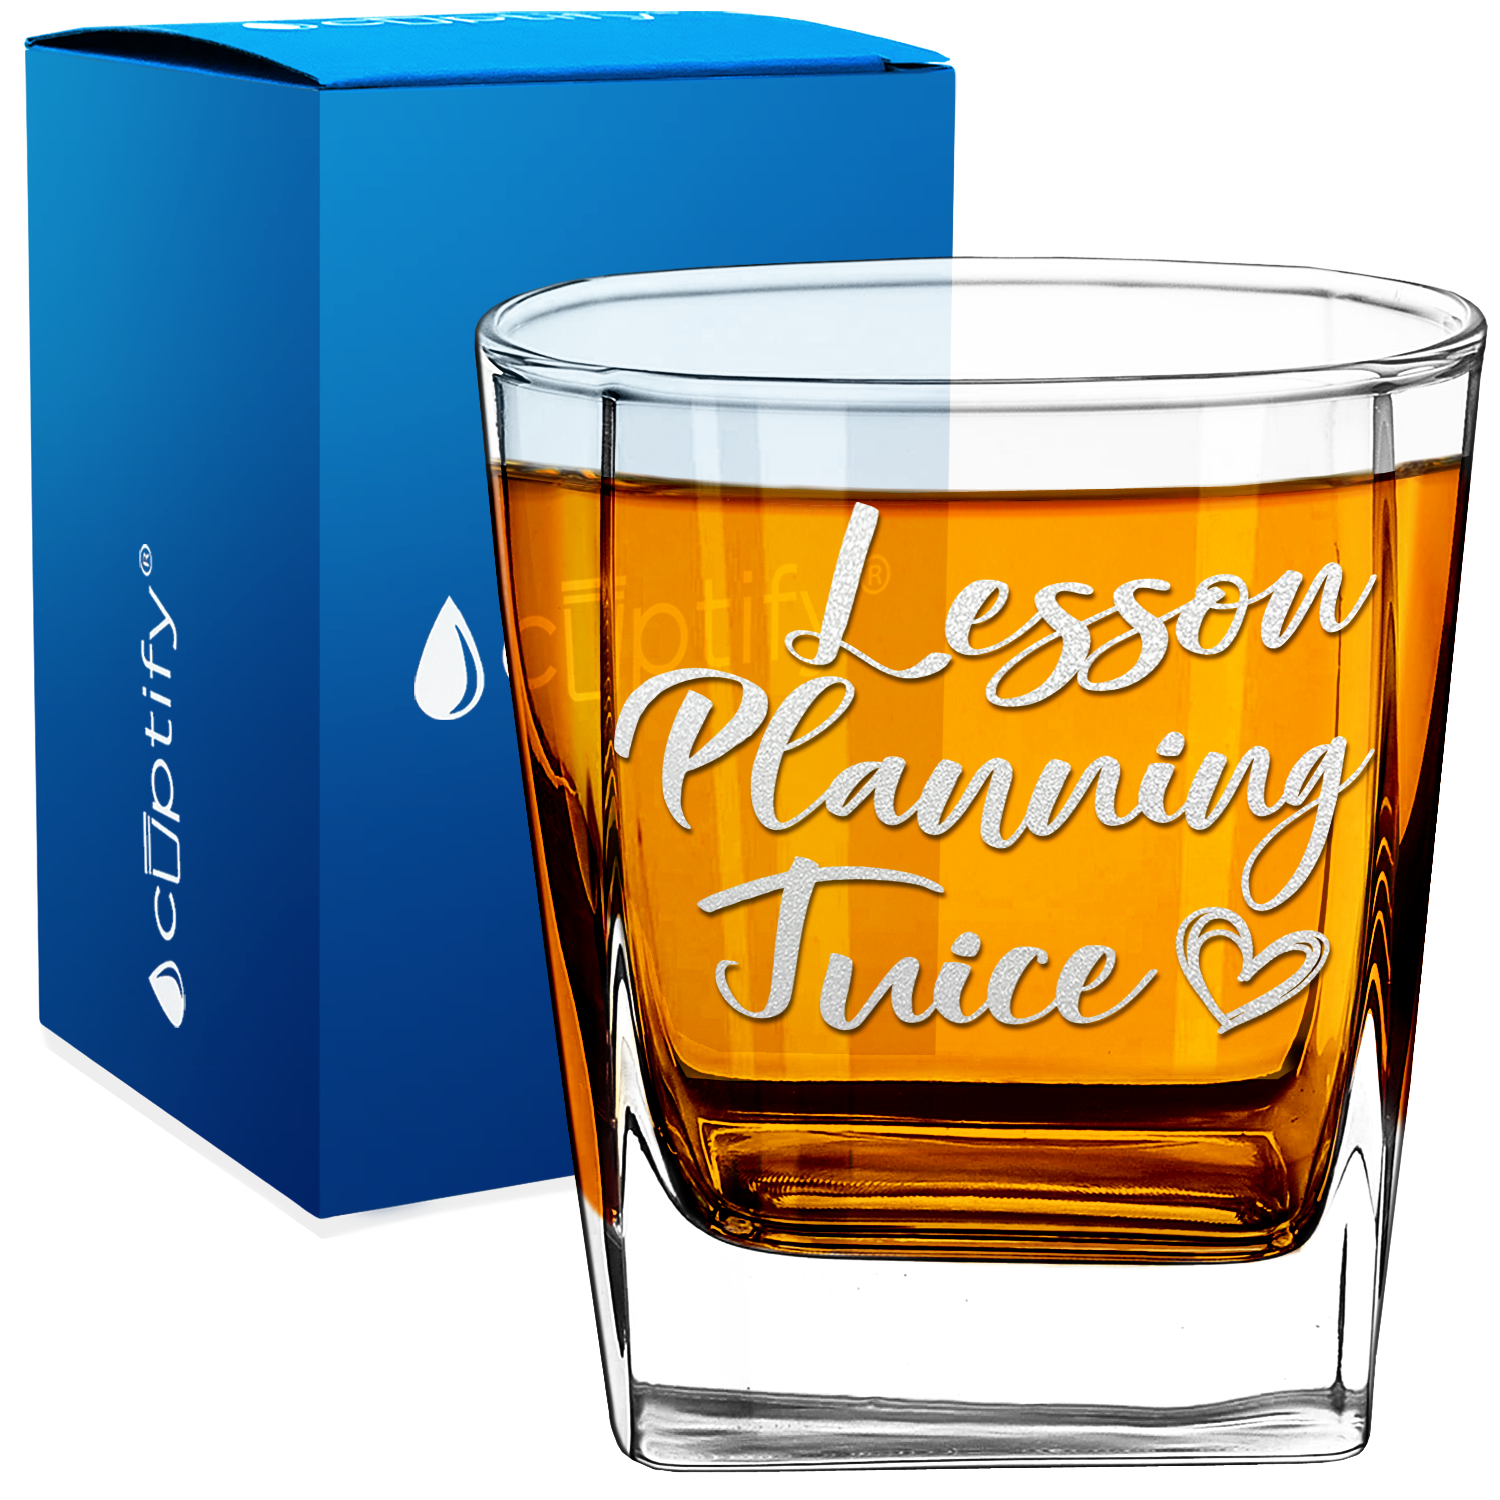 Lesson Planning Juice 12oz Double Old Fashioned Glass